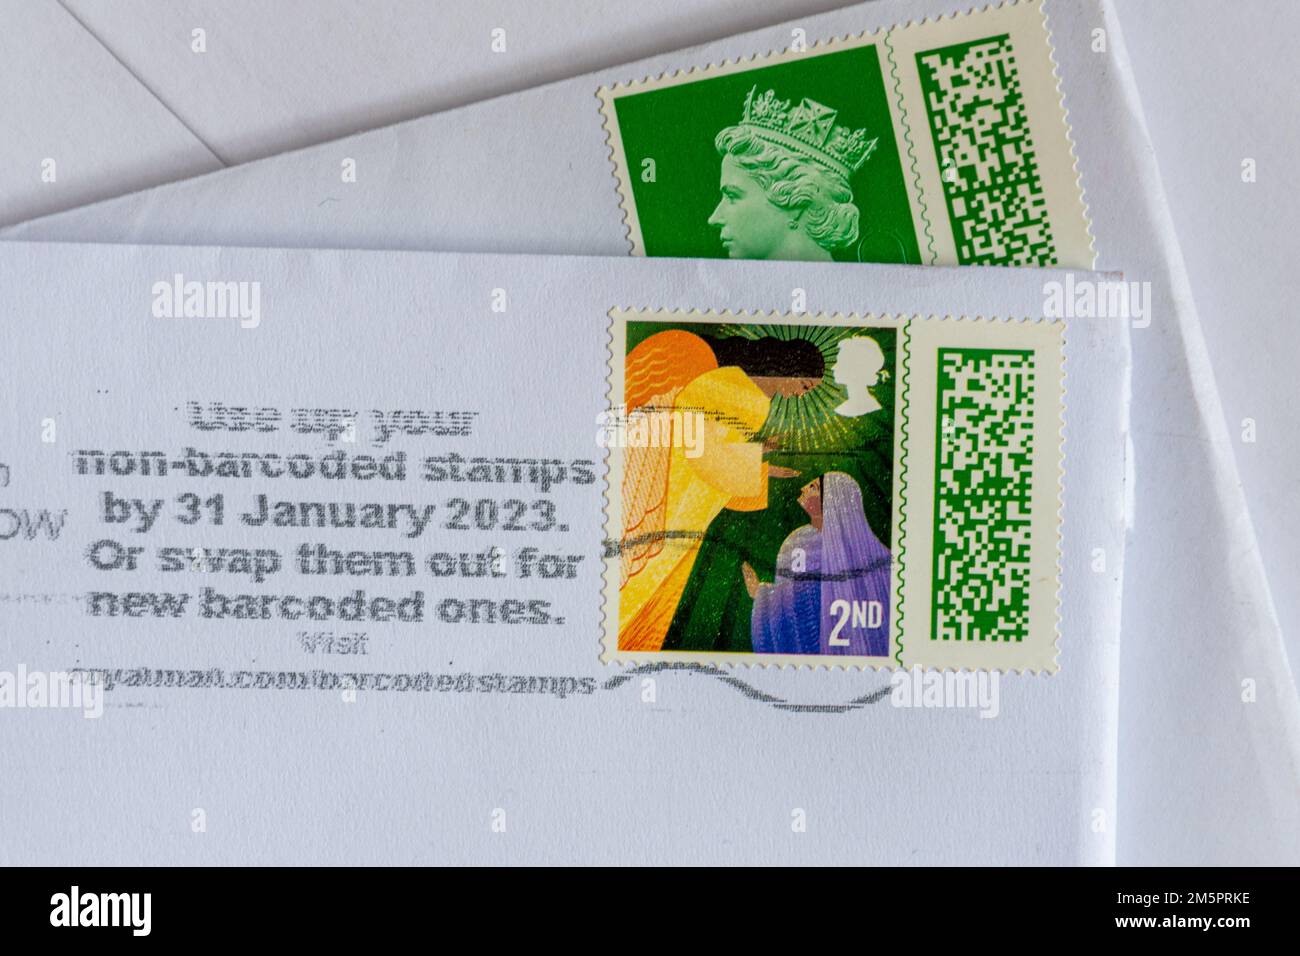 Use up your non-barcoded stamps by 31 January 2023 or swap them our for new barcoded ones, information stamped onto envelopes by Royal Mail, UK Stock Photo